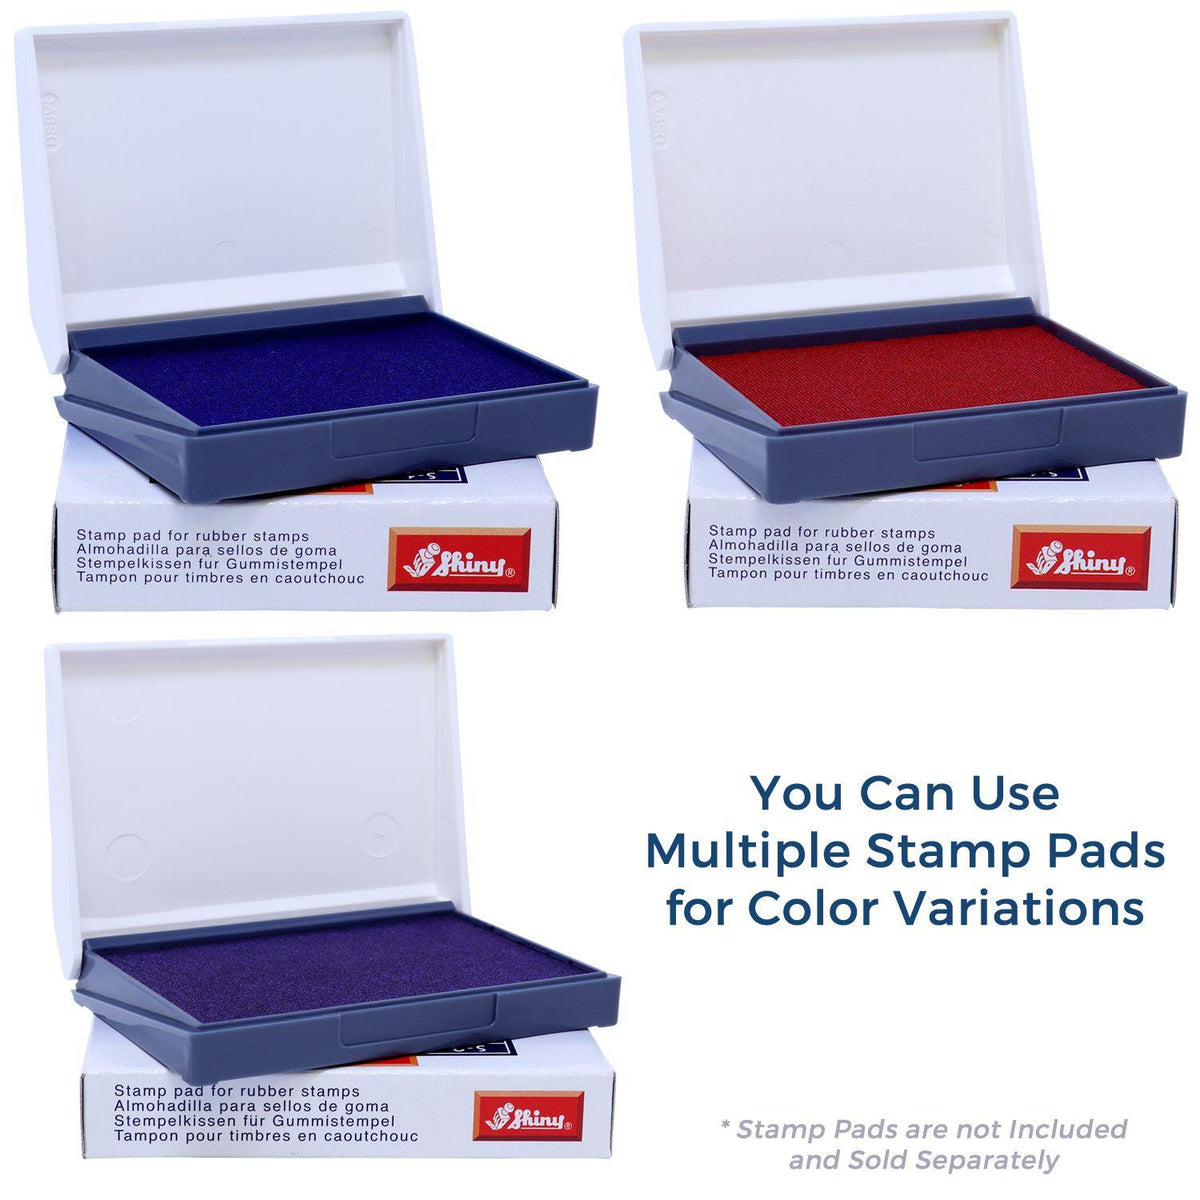 Stamp Pads for Dated Material Open Immediately Rubber Stamp Available